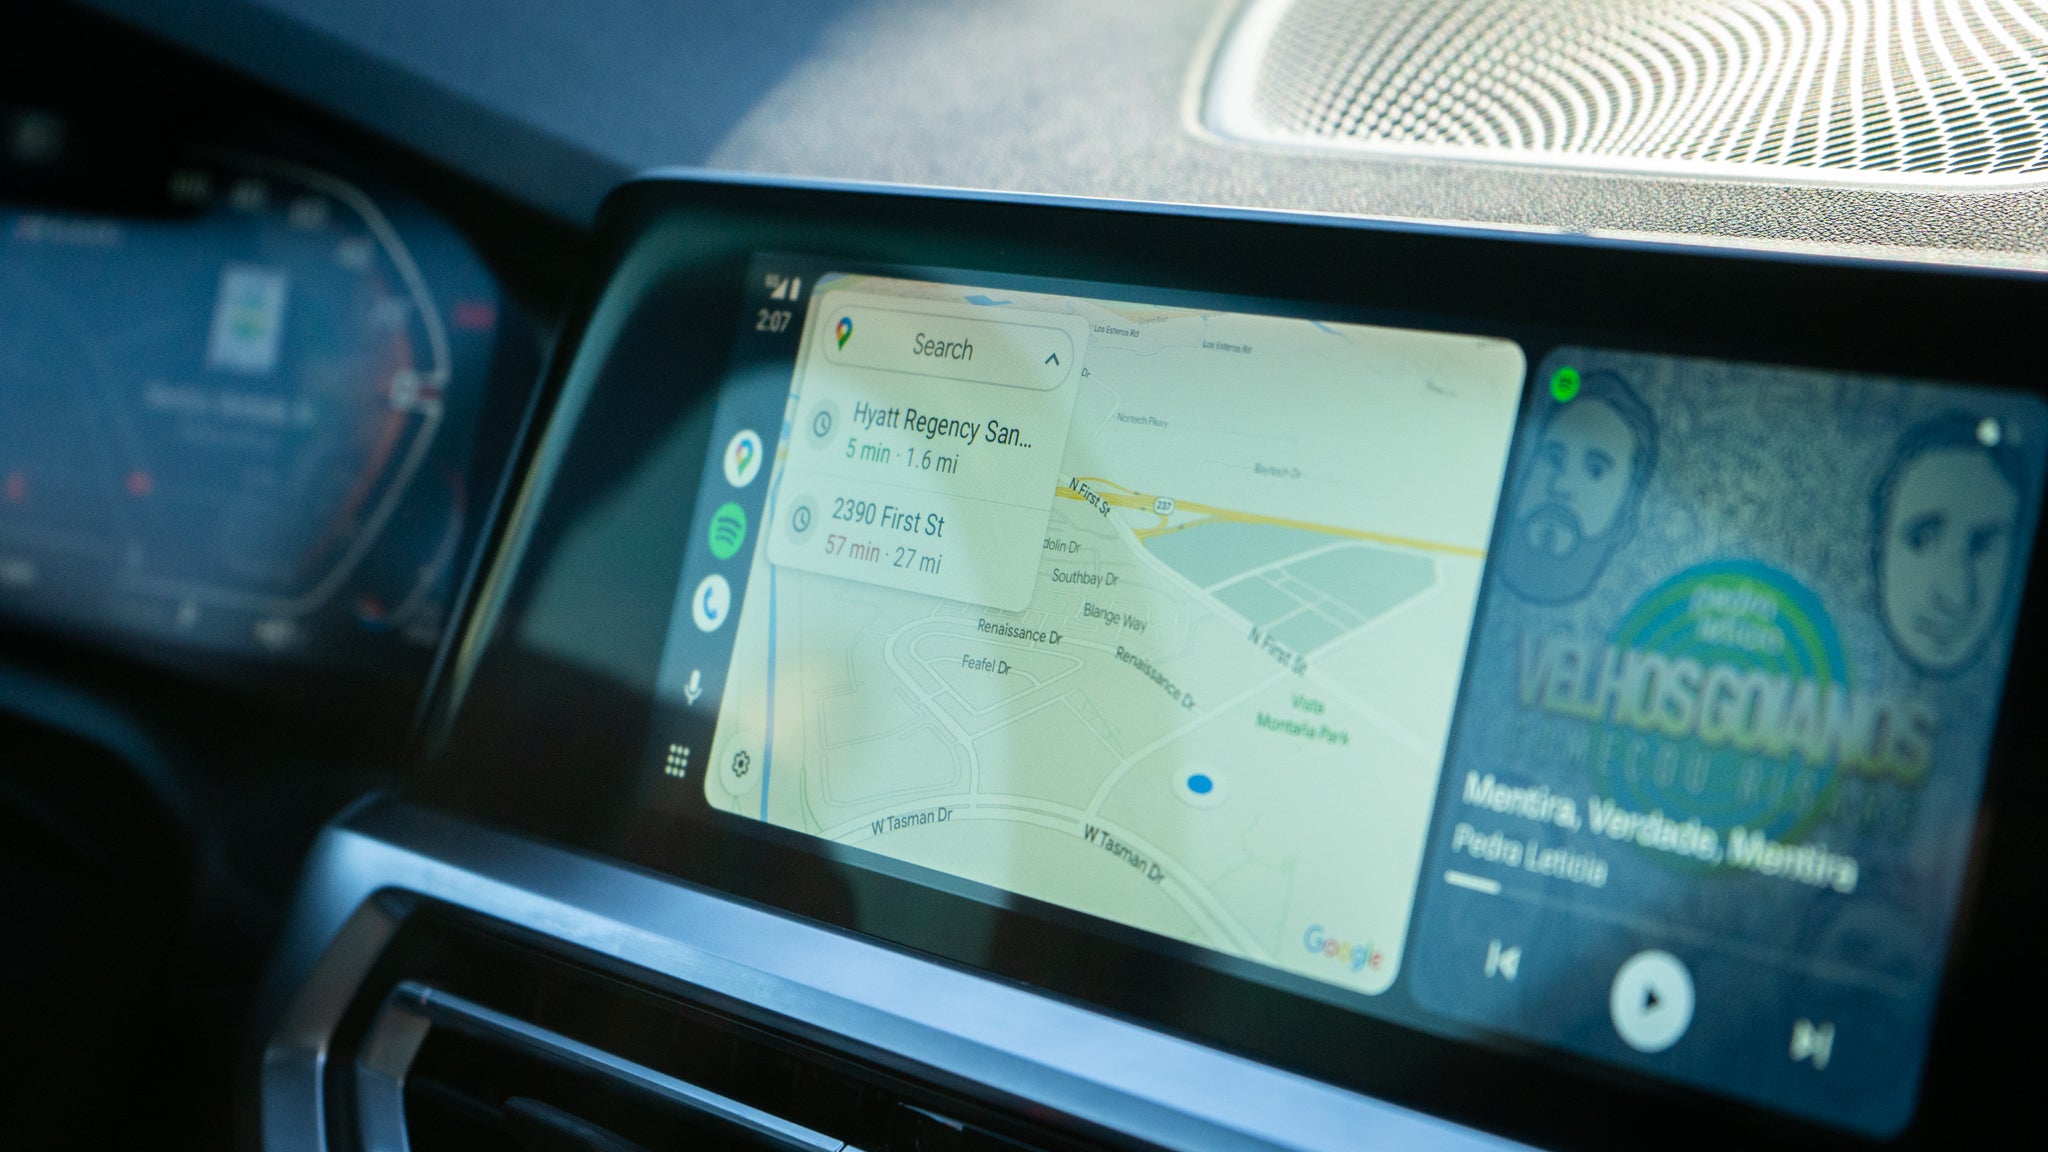 Android Auto Lets You Use Google Maps on Phone, Car Display Simultaneously  - CNET